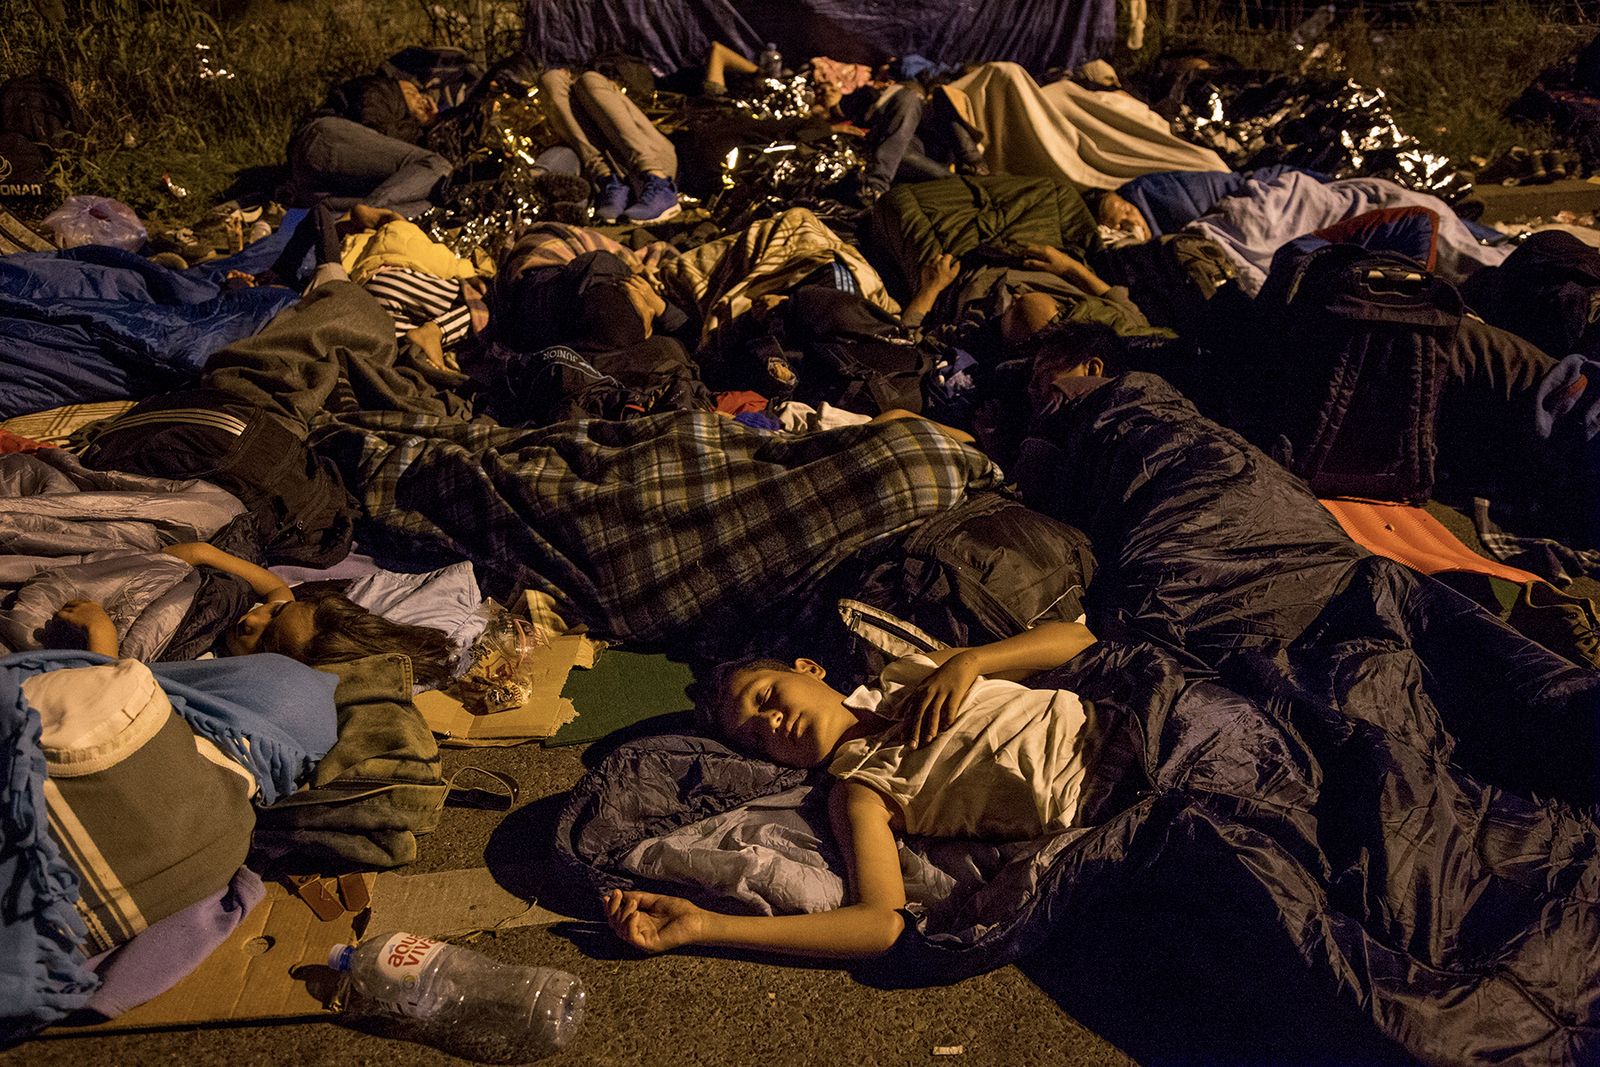 © Alessio Paduano - Migrants sleep on the street near the Serbian border with Hungary in Horgos, Serbia on September 15, 2015.